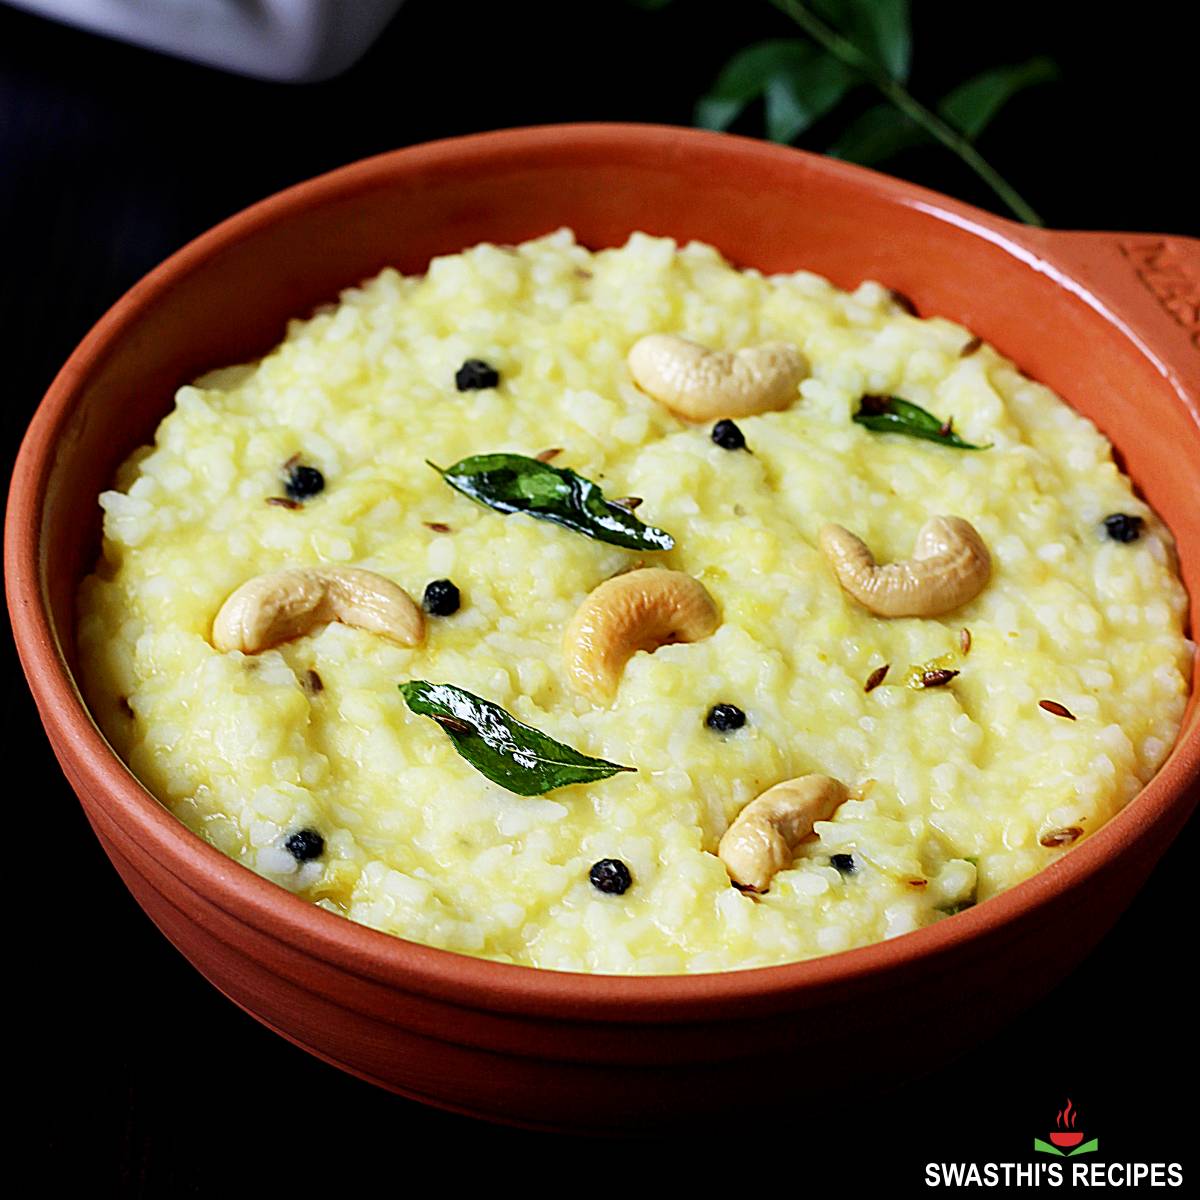 Pongal also known as ven pongal is a rice lentil dish